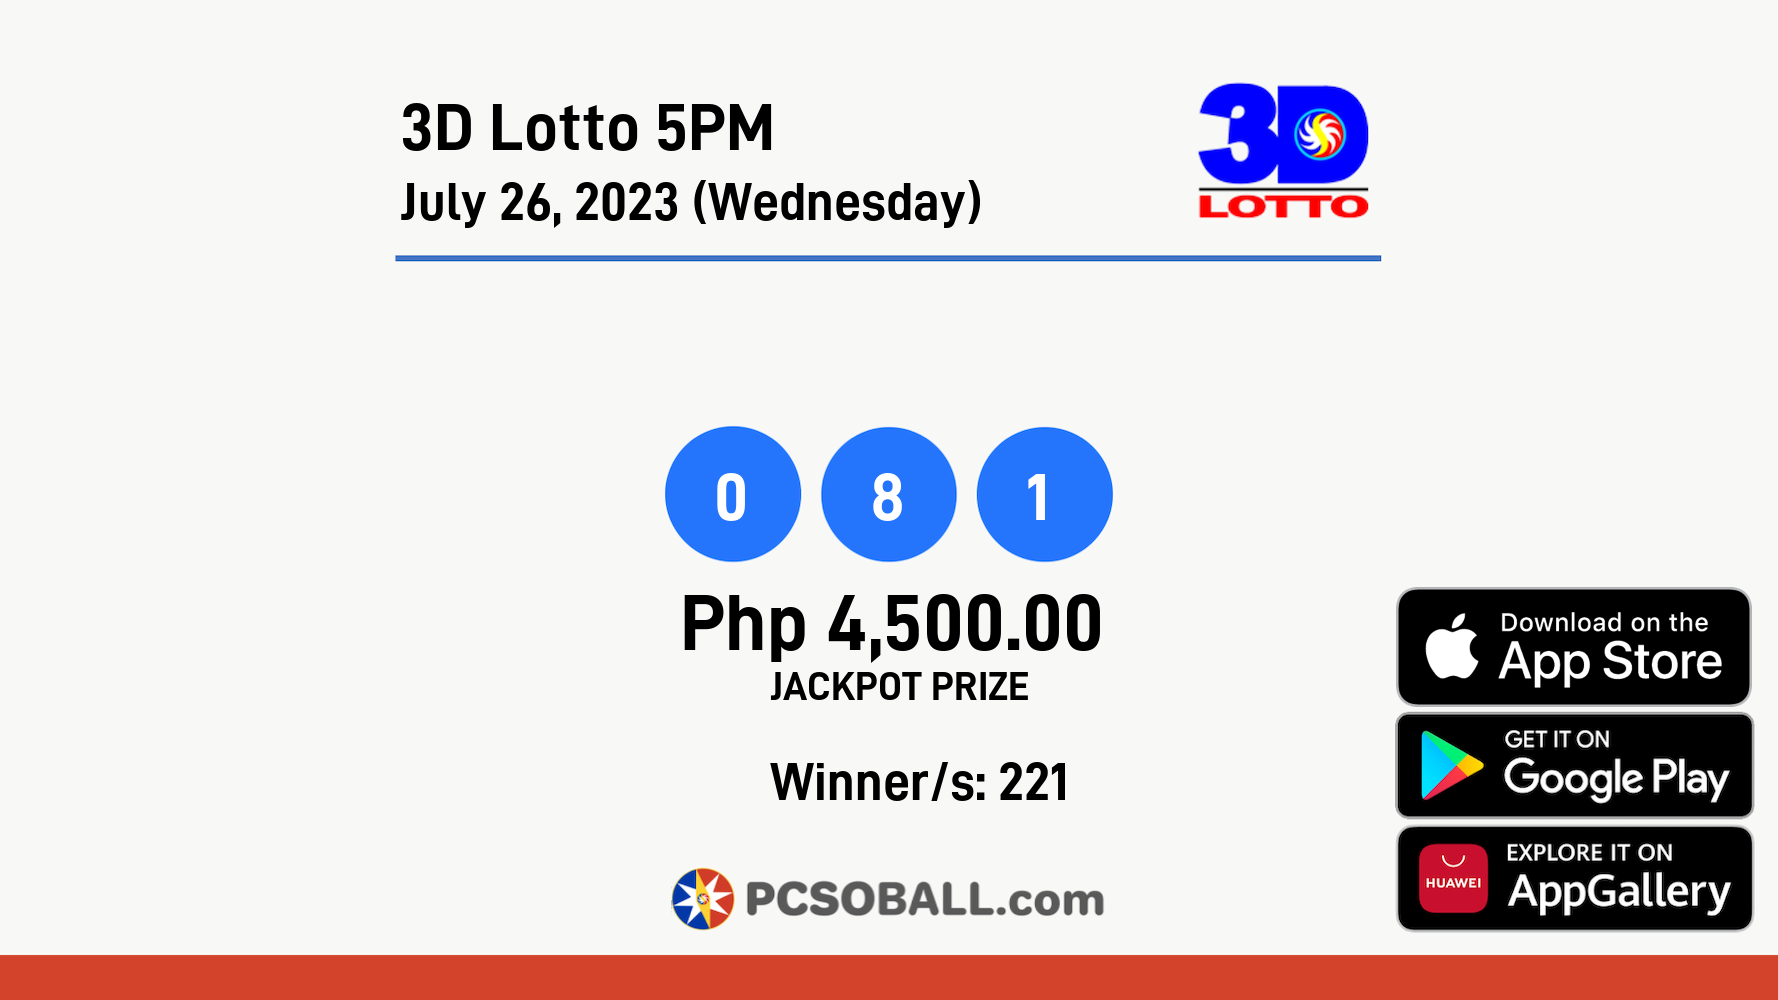 3D Lotto 5PM July 26, 2023 (Wednesday) Result